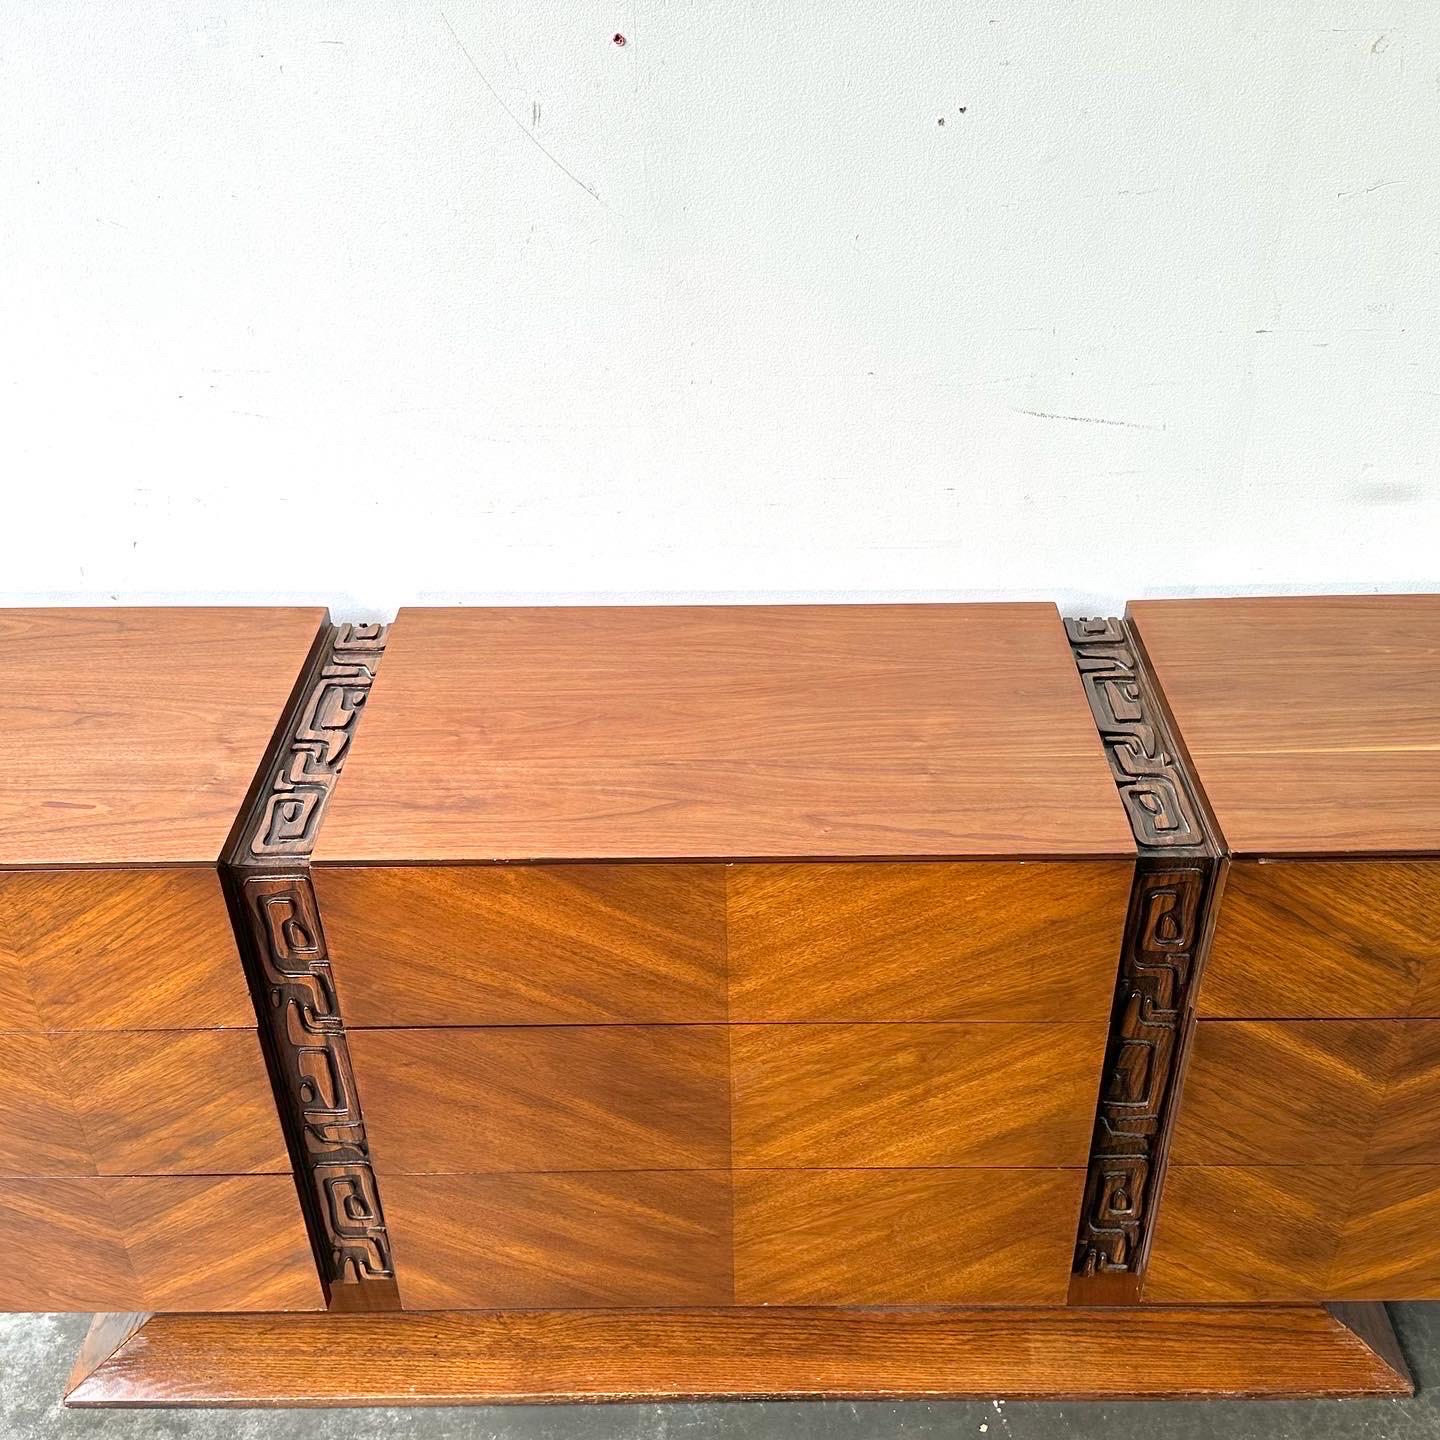 A handsome nine drawer dresser or credenza by united.

Brutalist inspired with tiki tones in the manner of Paul Evans or witco.

Great condition with minor signs of wear and a refinished top.